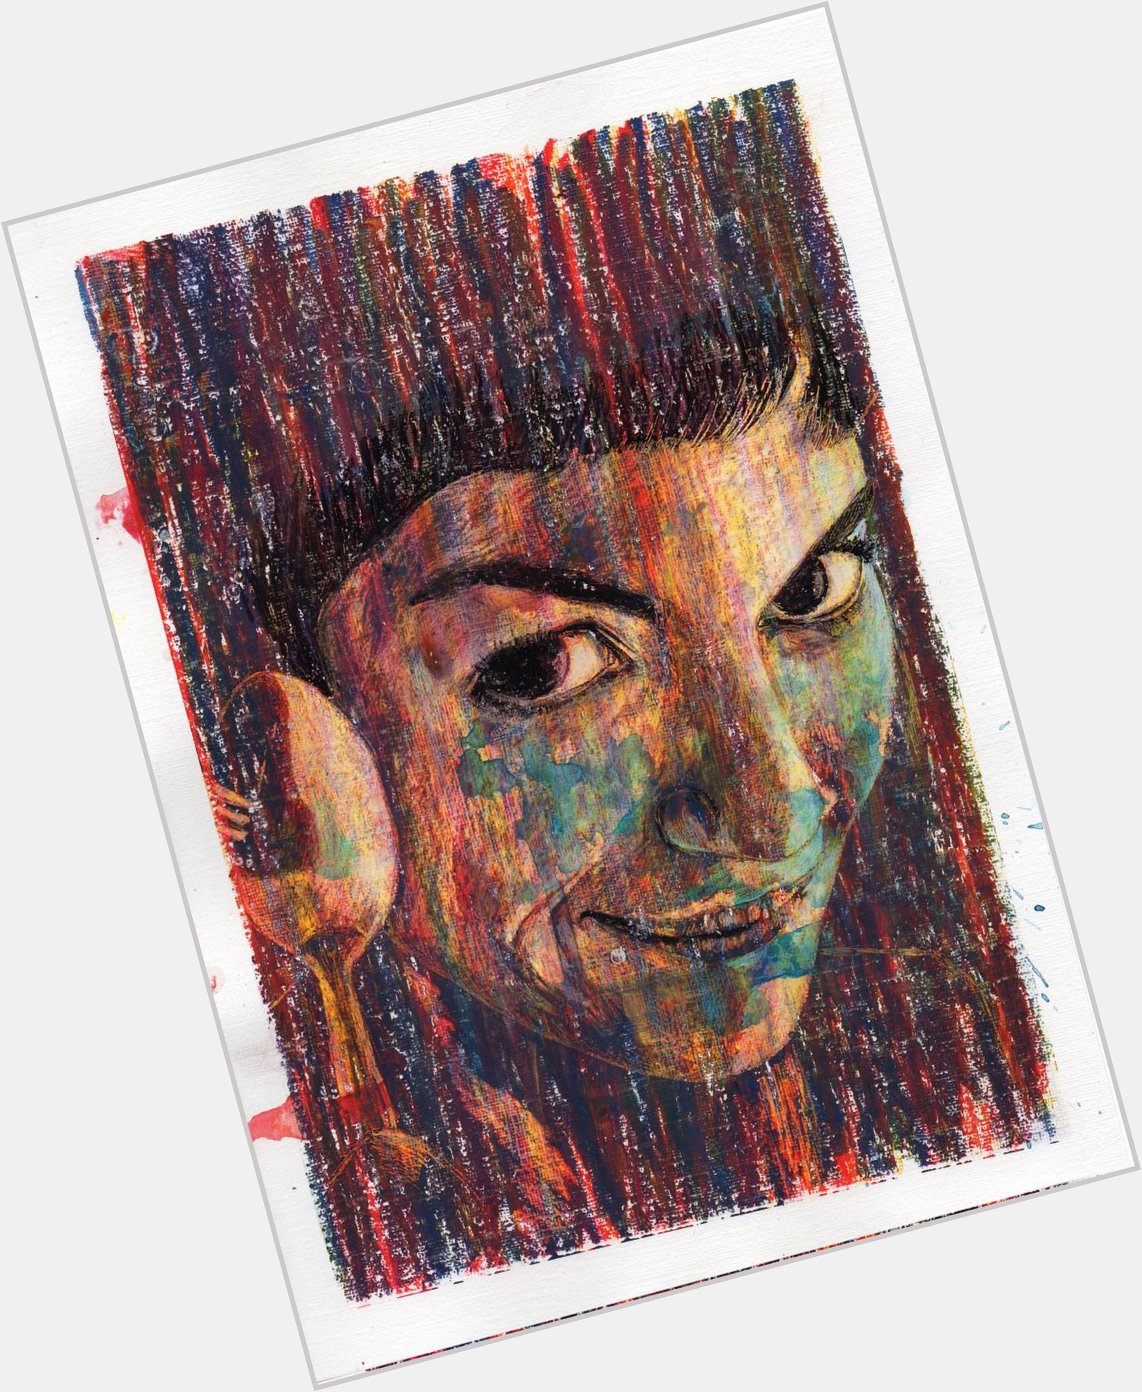 Happy birthday Audrey Tautou! This picture: oil and ink on acrylic paper, 21cm x 30cm. 